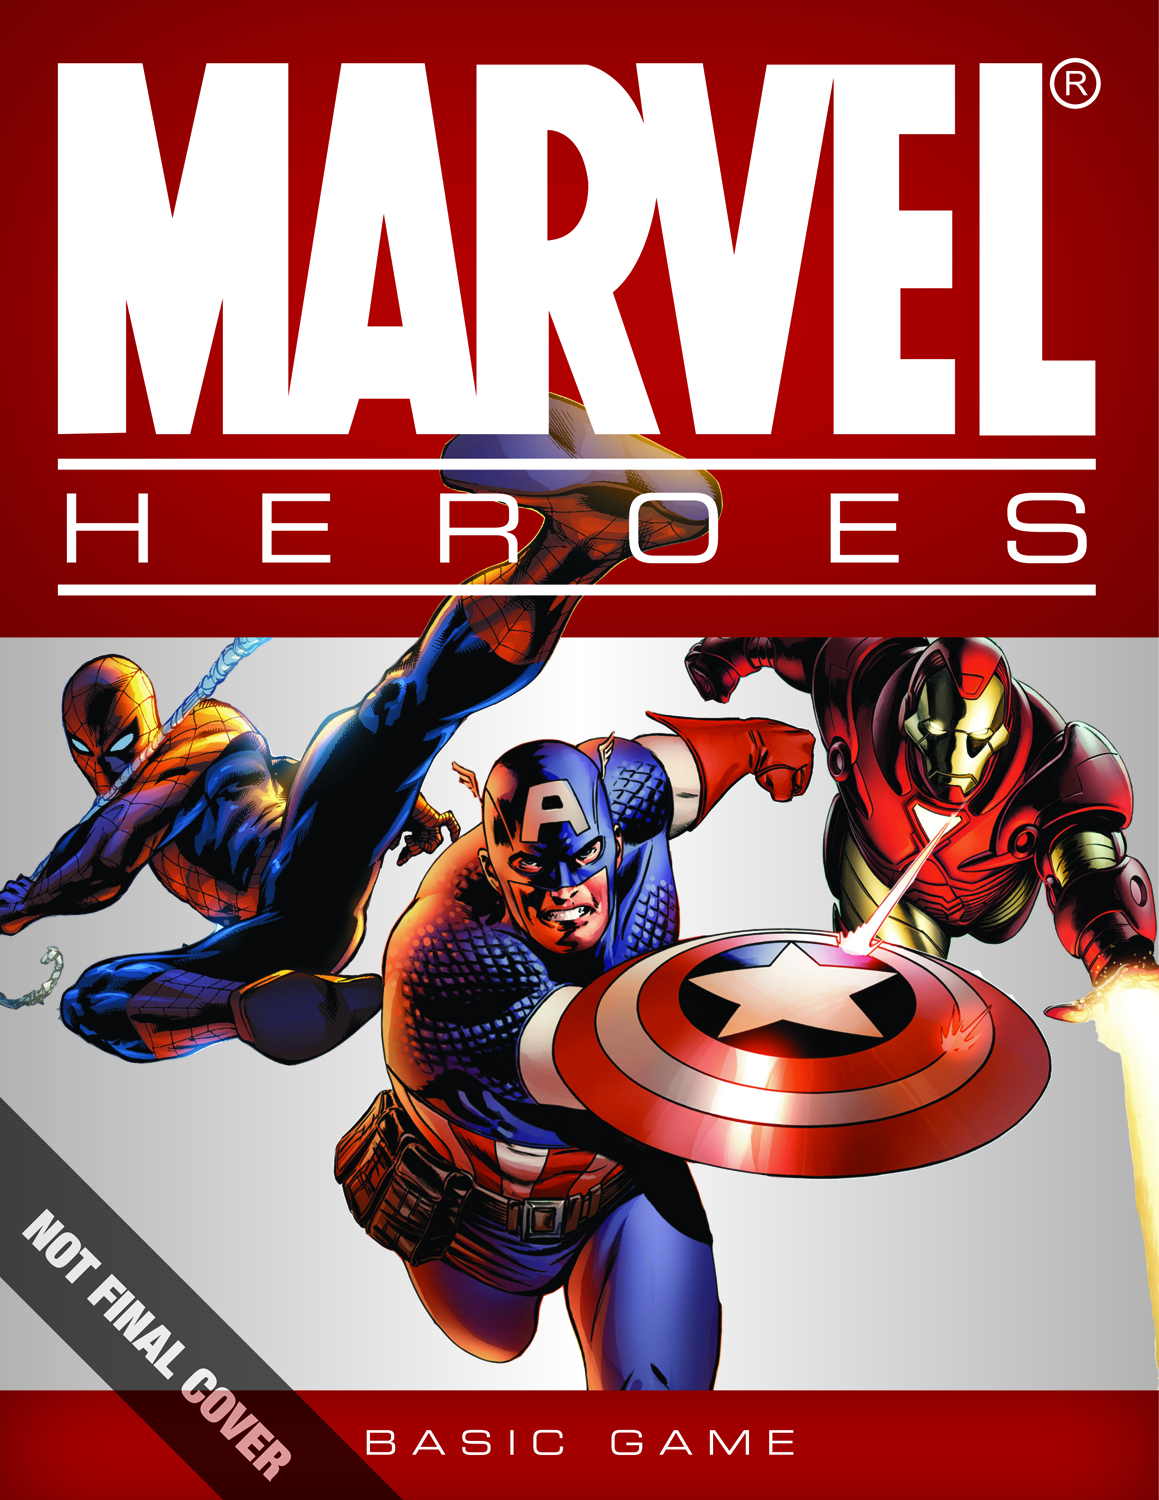 Marvel Heroic Roleplaying Game 